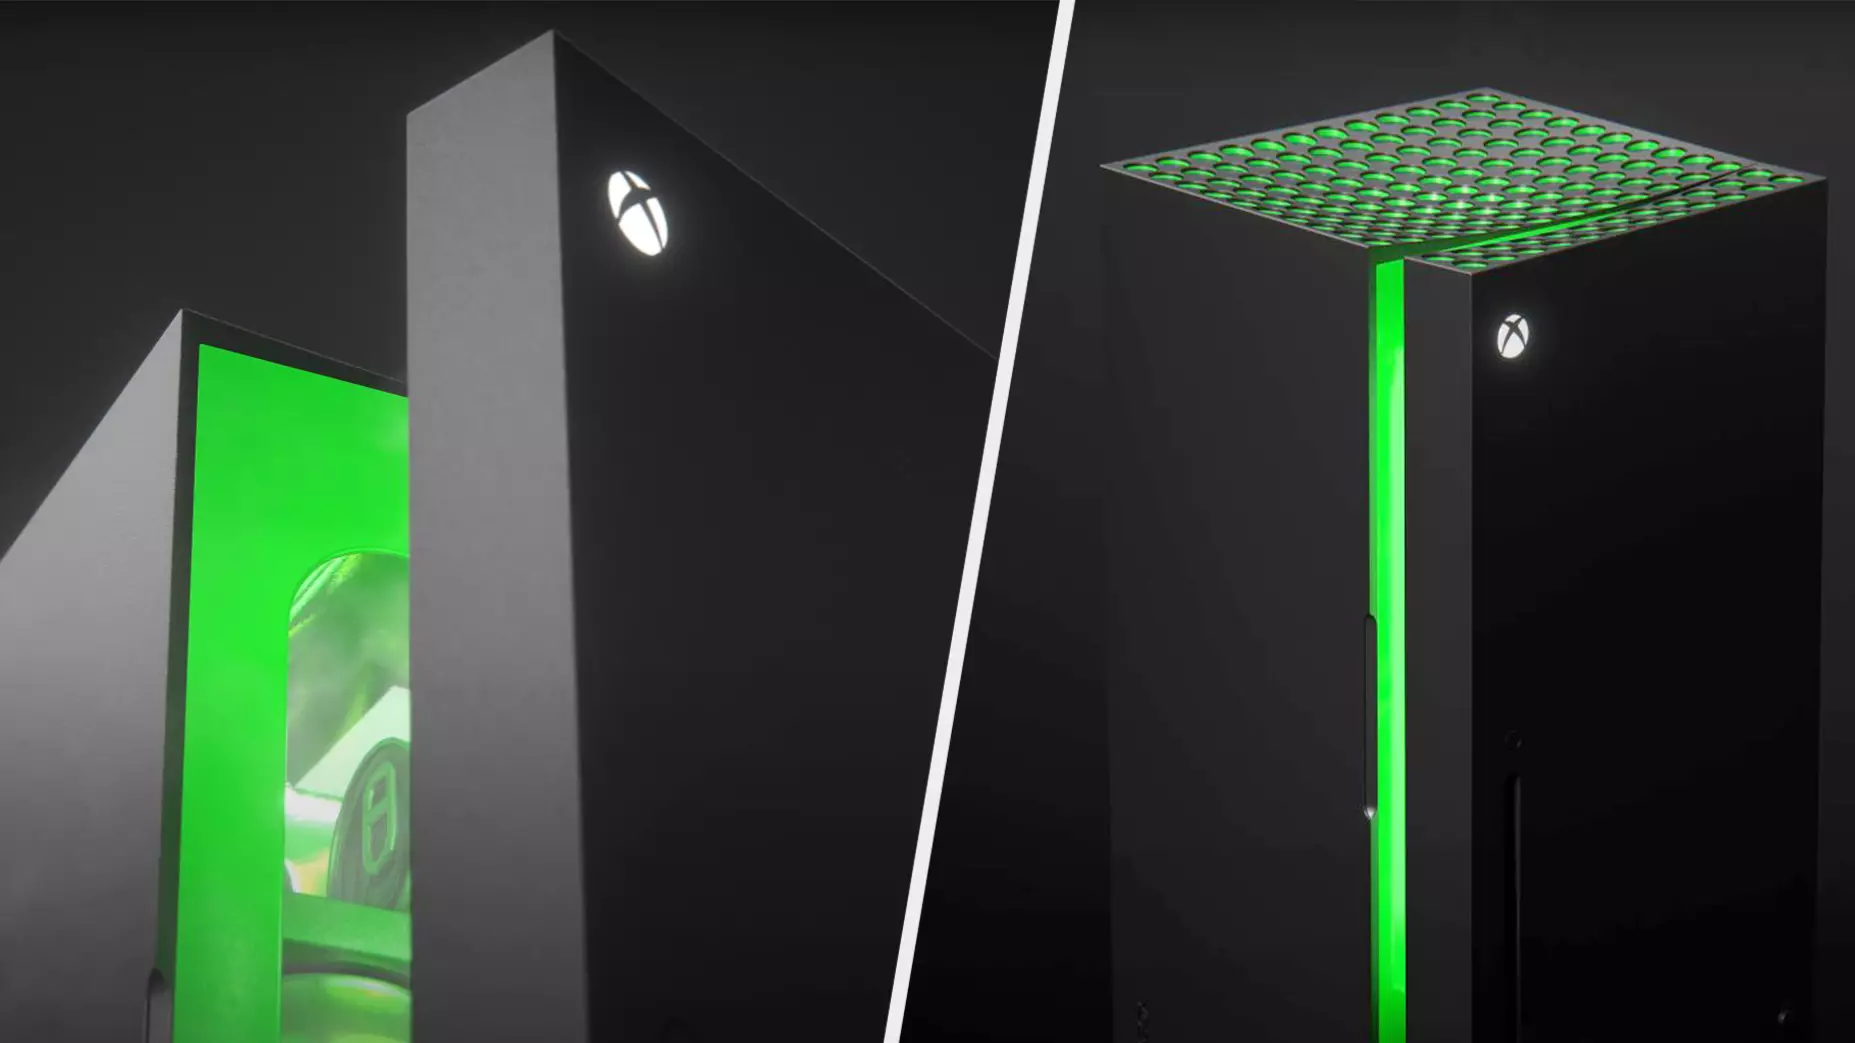 Xbox Is Genuinely Releasing A Series X Mini Fridge, Here’s The Trailer